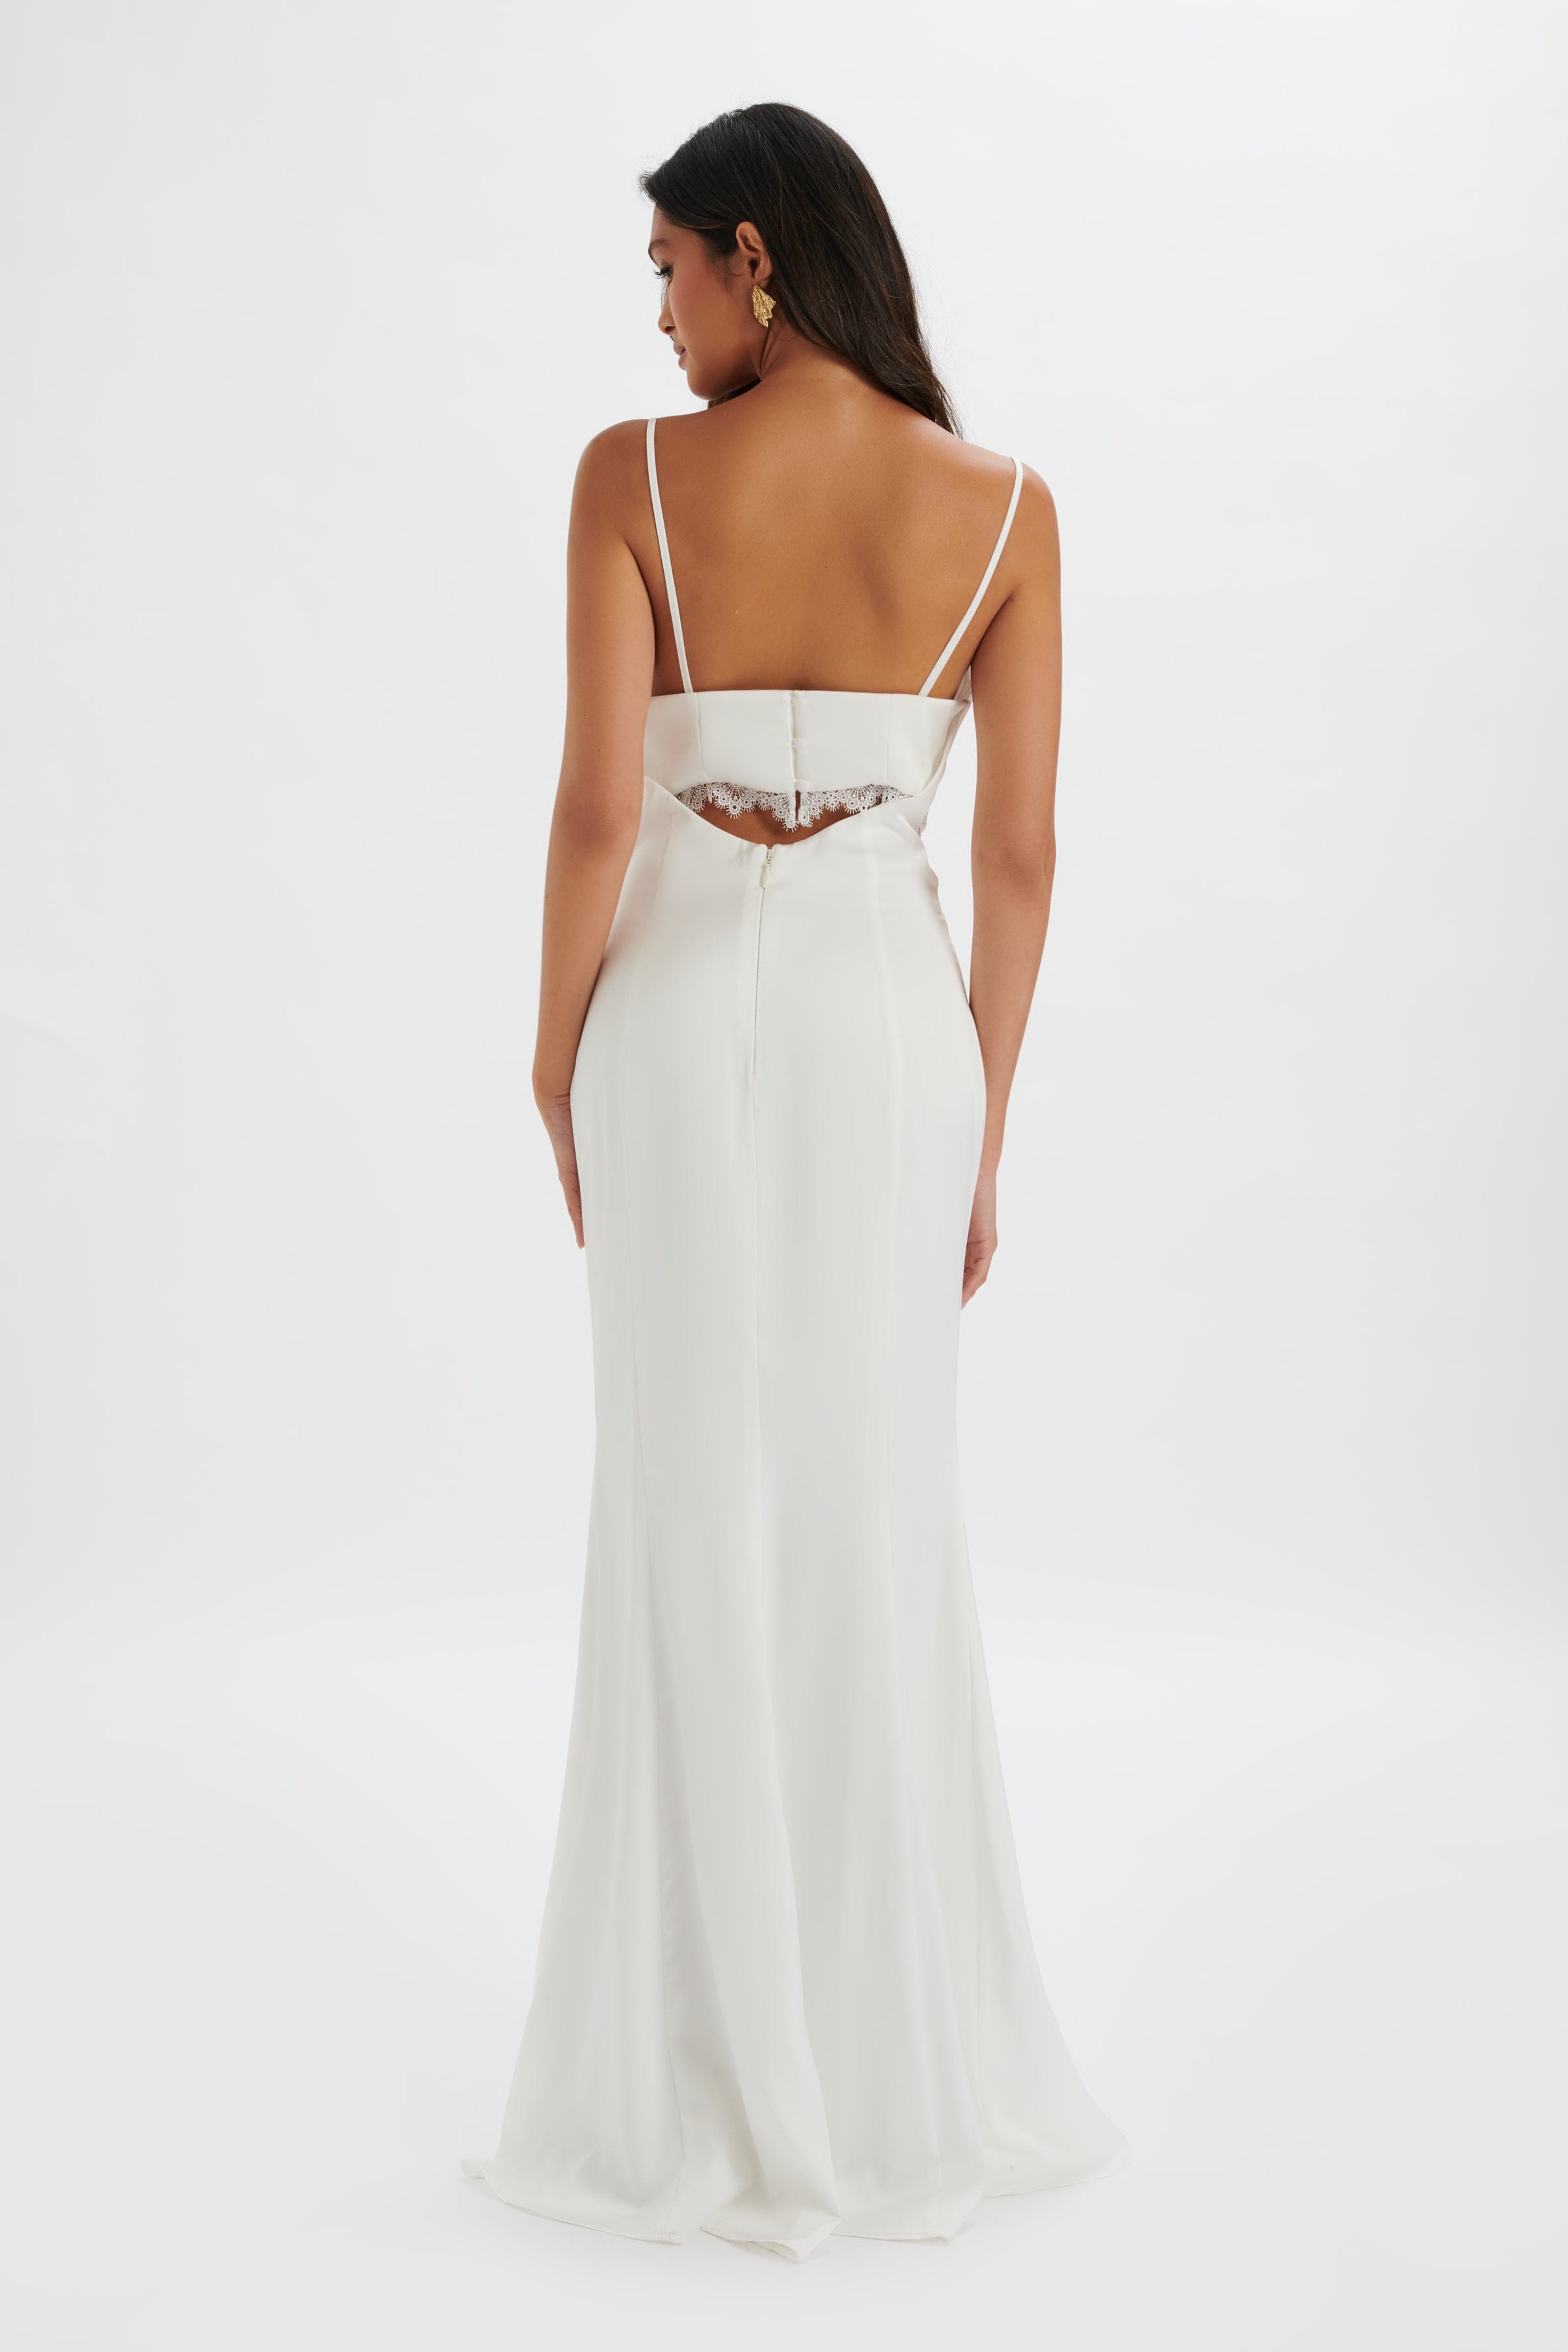 MAY Lace Insert Satin Maxi Dress in White